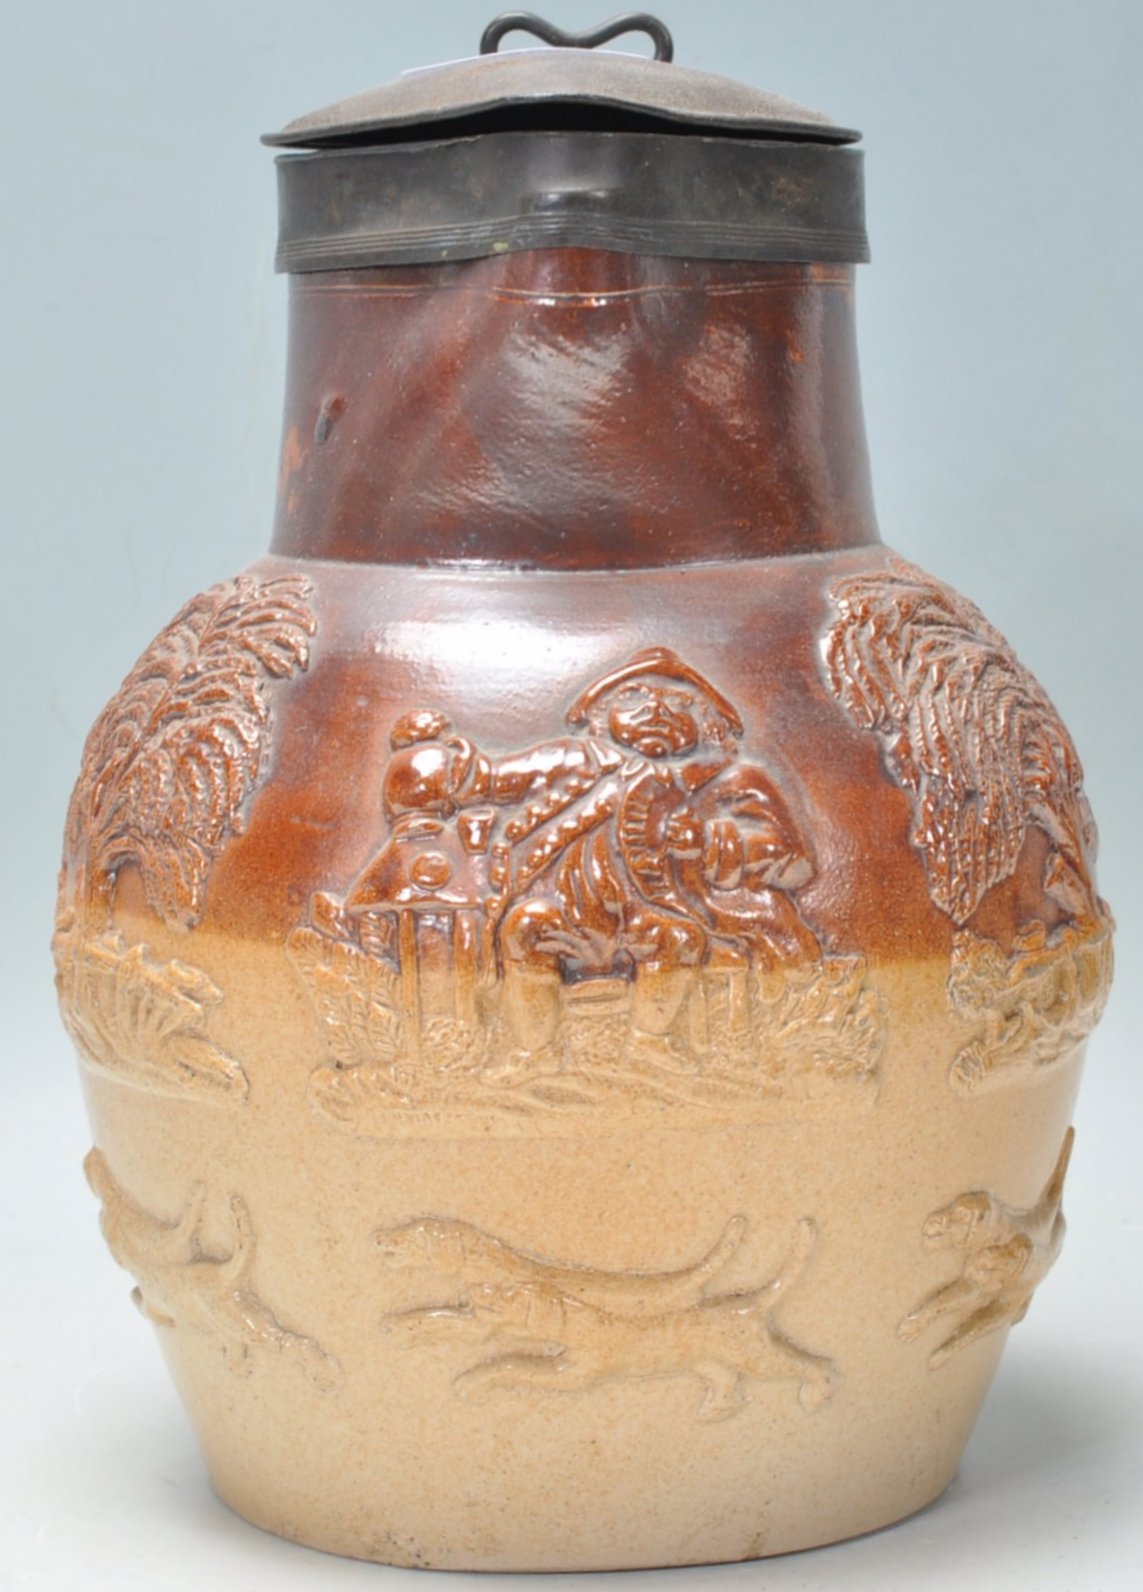 Vauxhall Pottery - An early 19th Century London Sa - Image 2 of 7